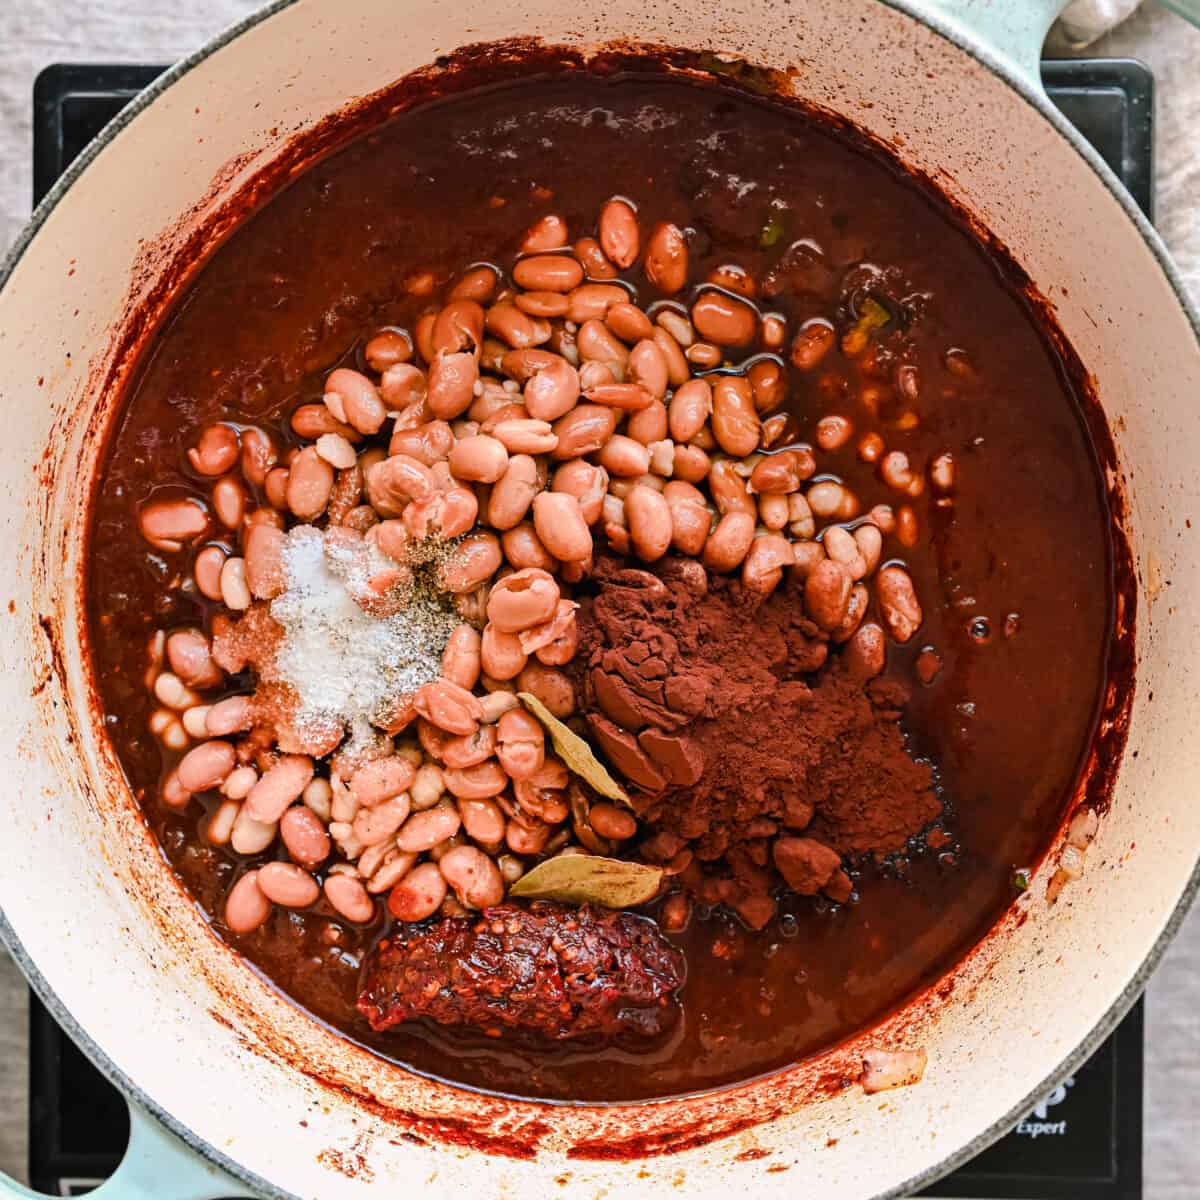 pinto beans, cocoa powder, chipotle peppers and bay leaves added to chili